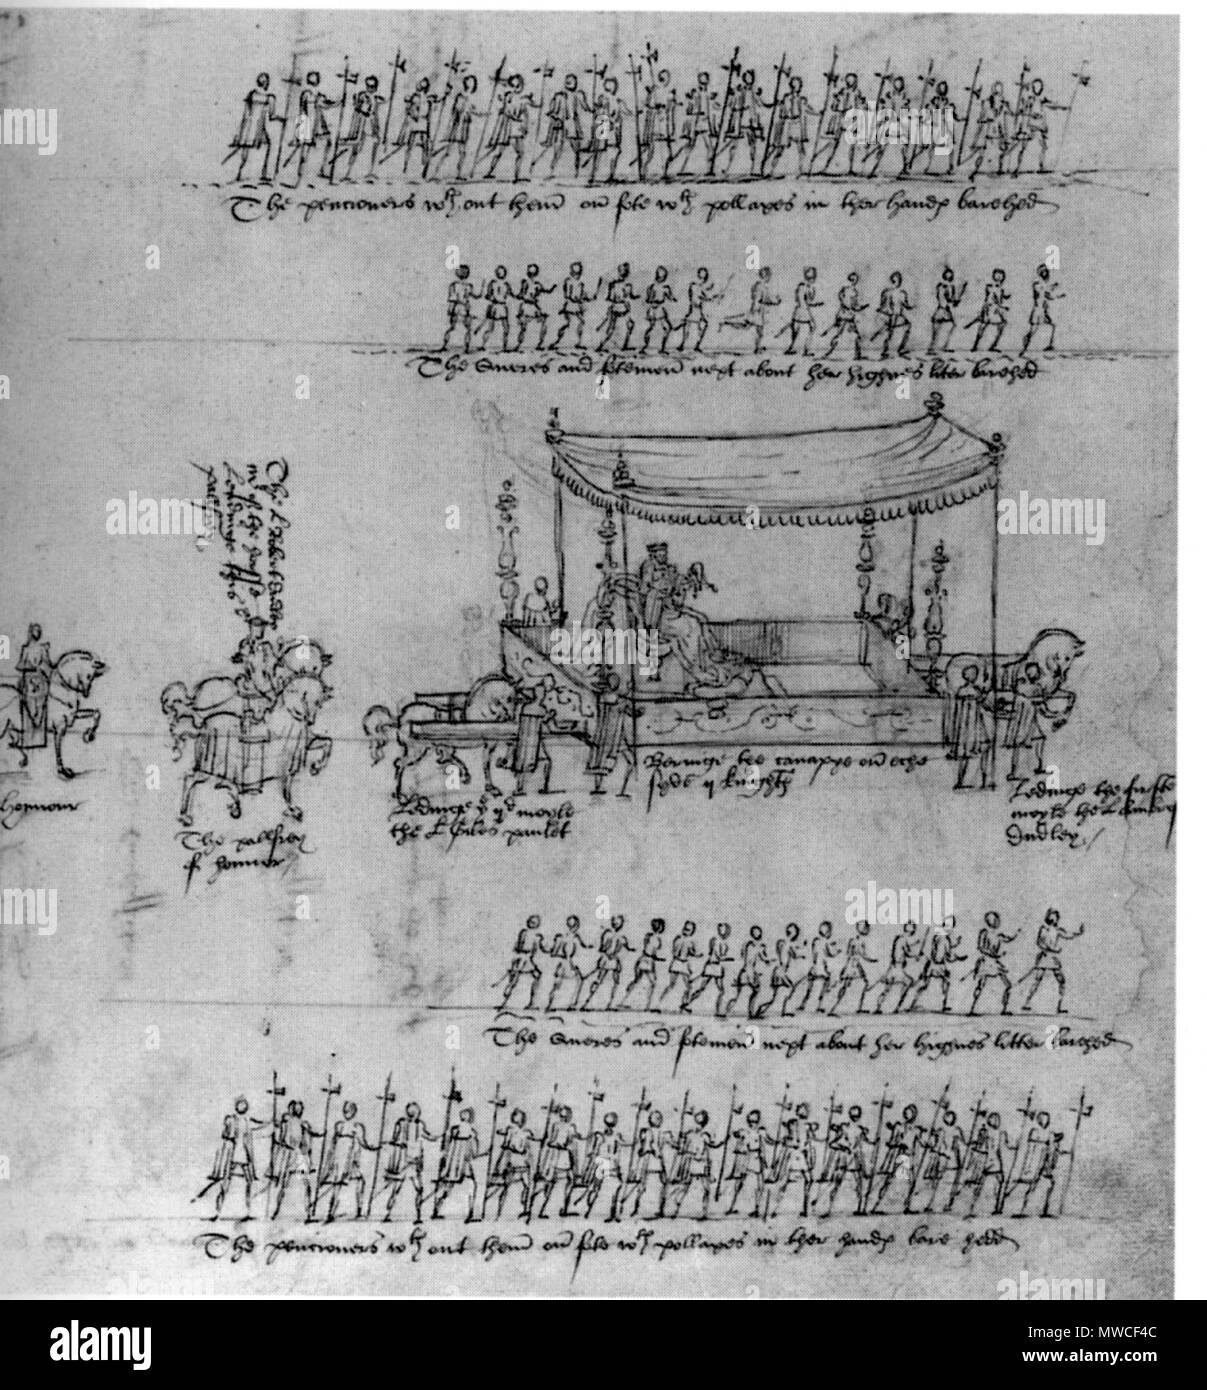 . English: Sketch of coronation procession of Elizabeth I of England, as if seen from above, in bird's perspective. Participants are described in contemporary handwriting. circa 1559. Unknown 184 Elizabeth I coronation procession bird perspective Stock Photo